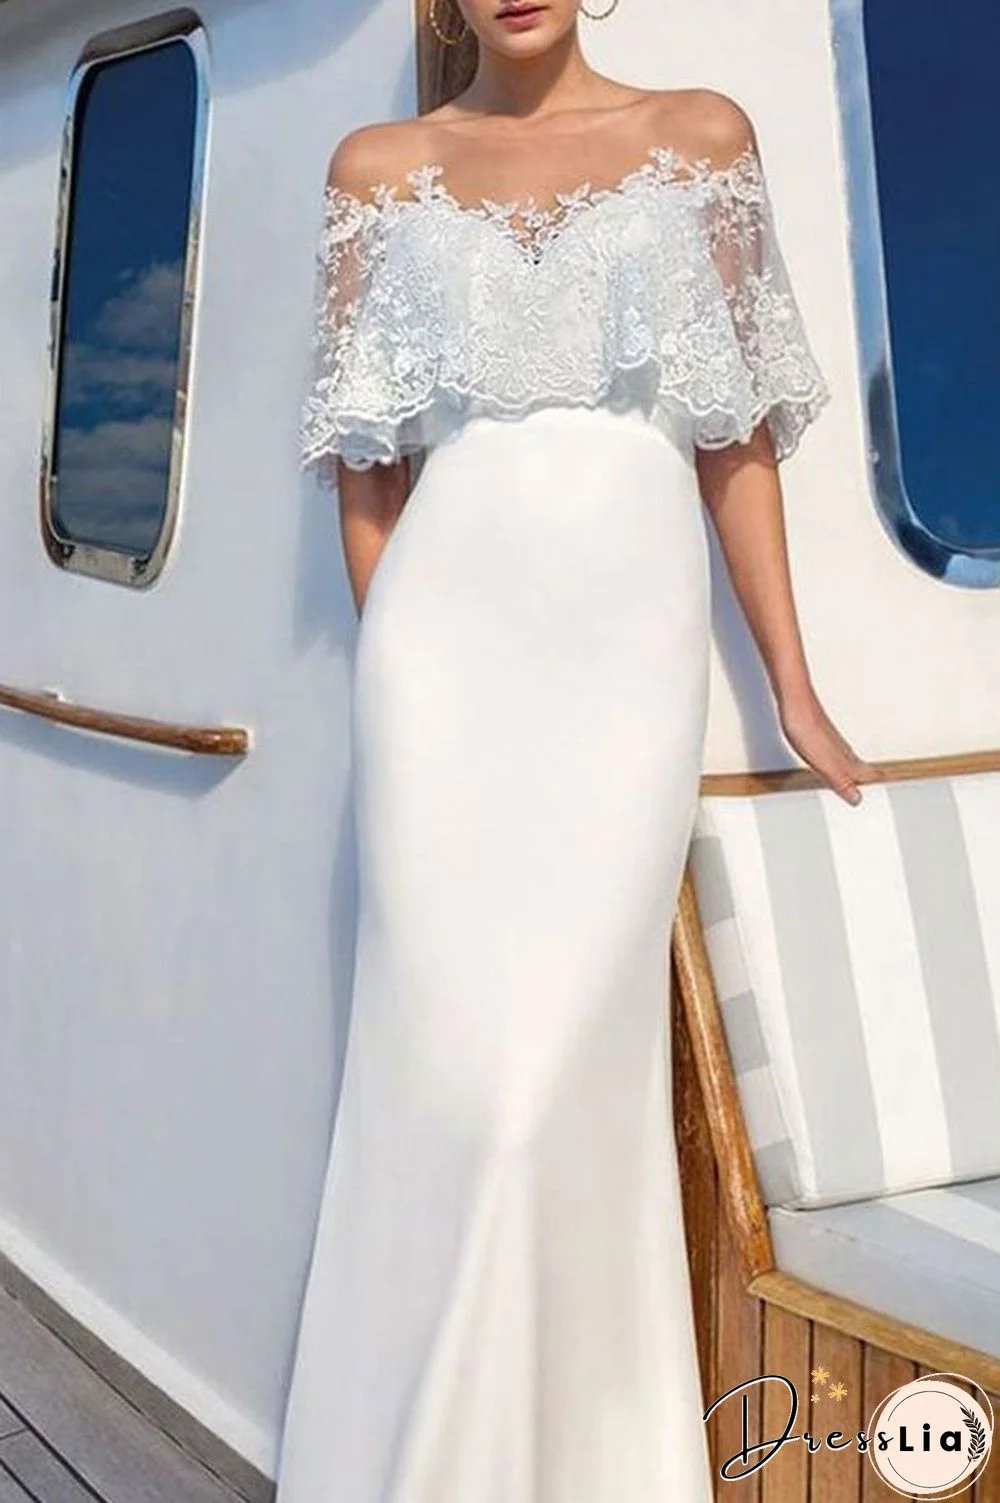 White Off-the-shoulder Lace Overlay Dress